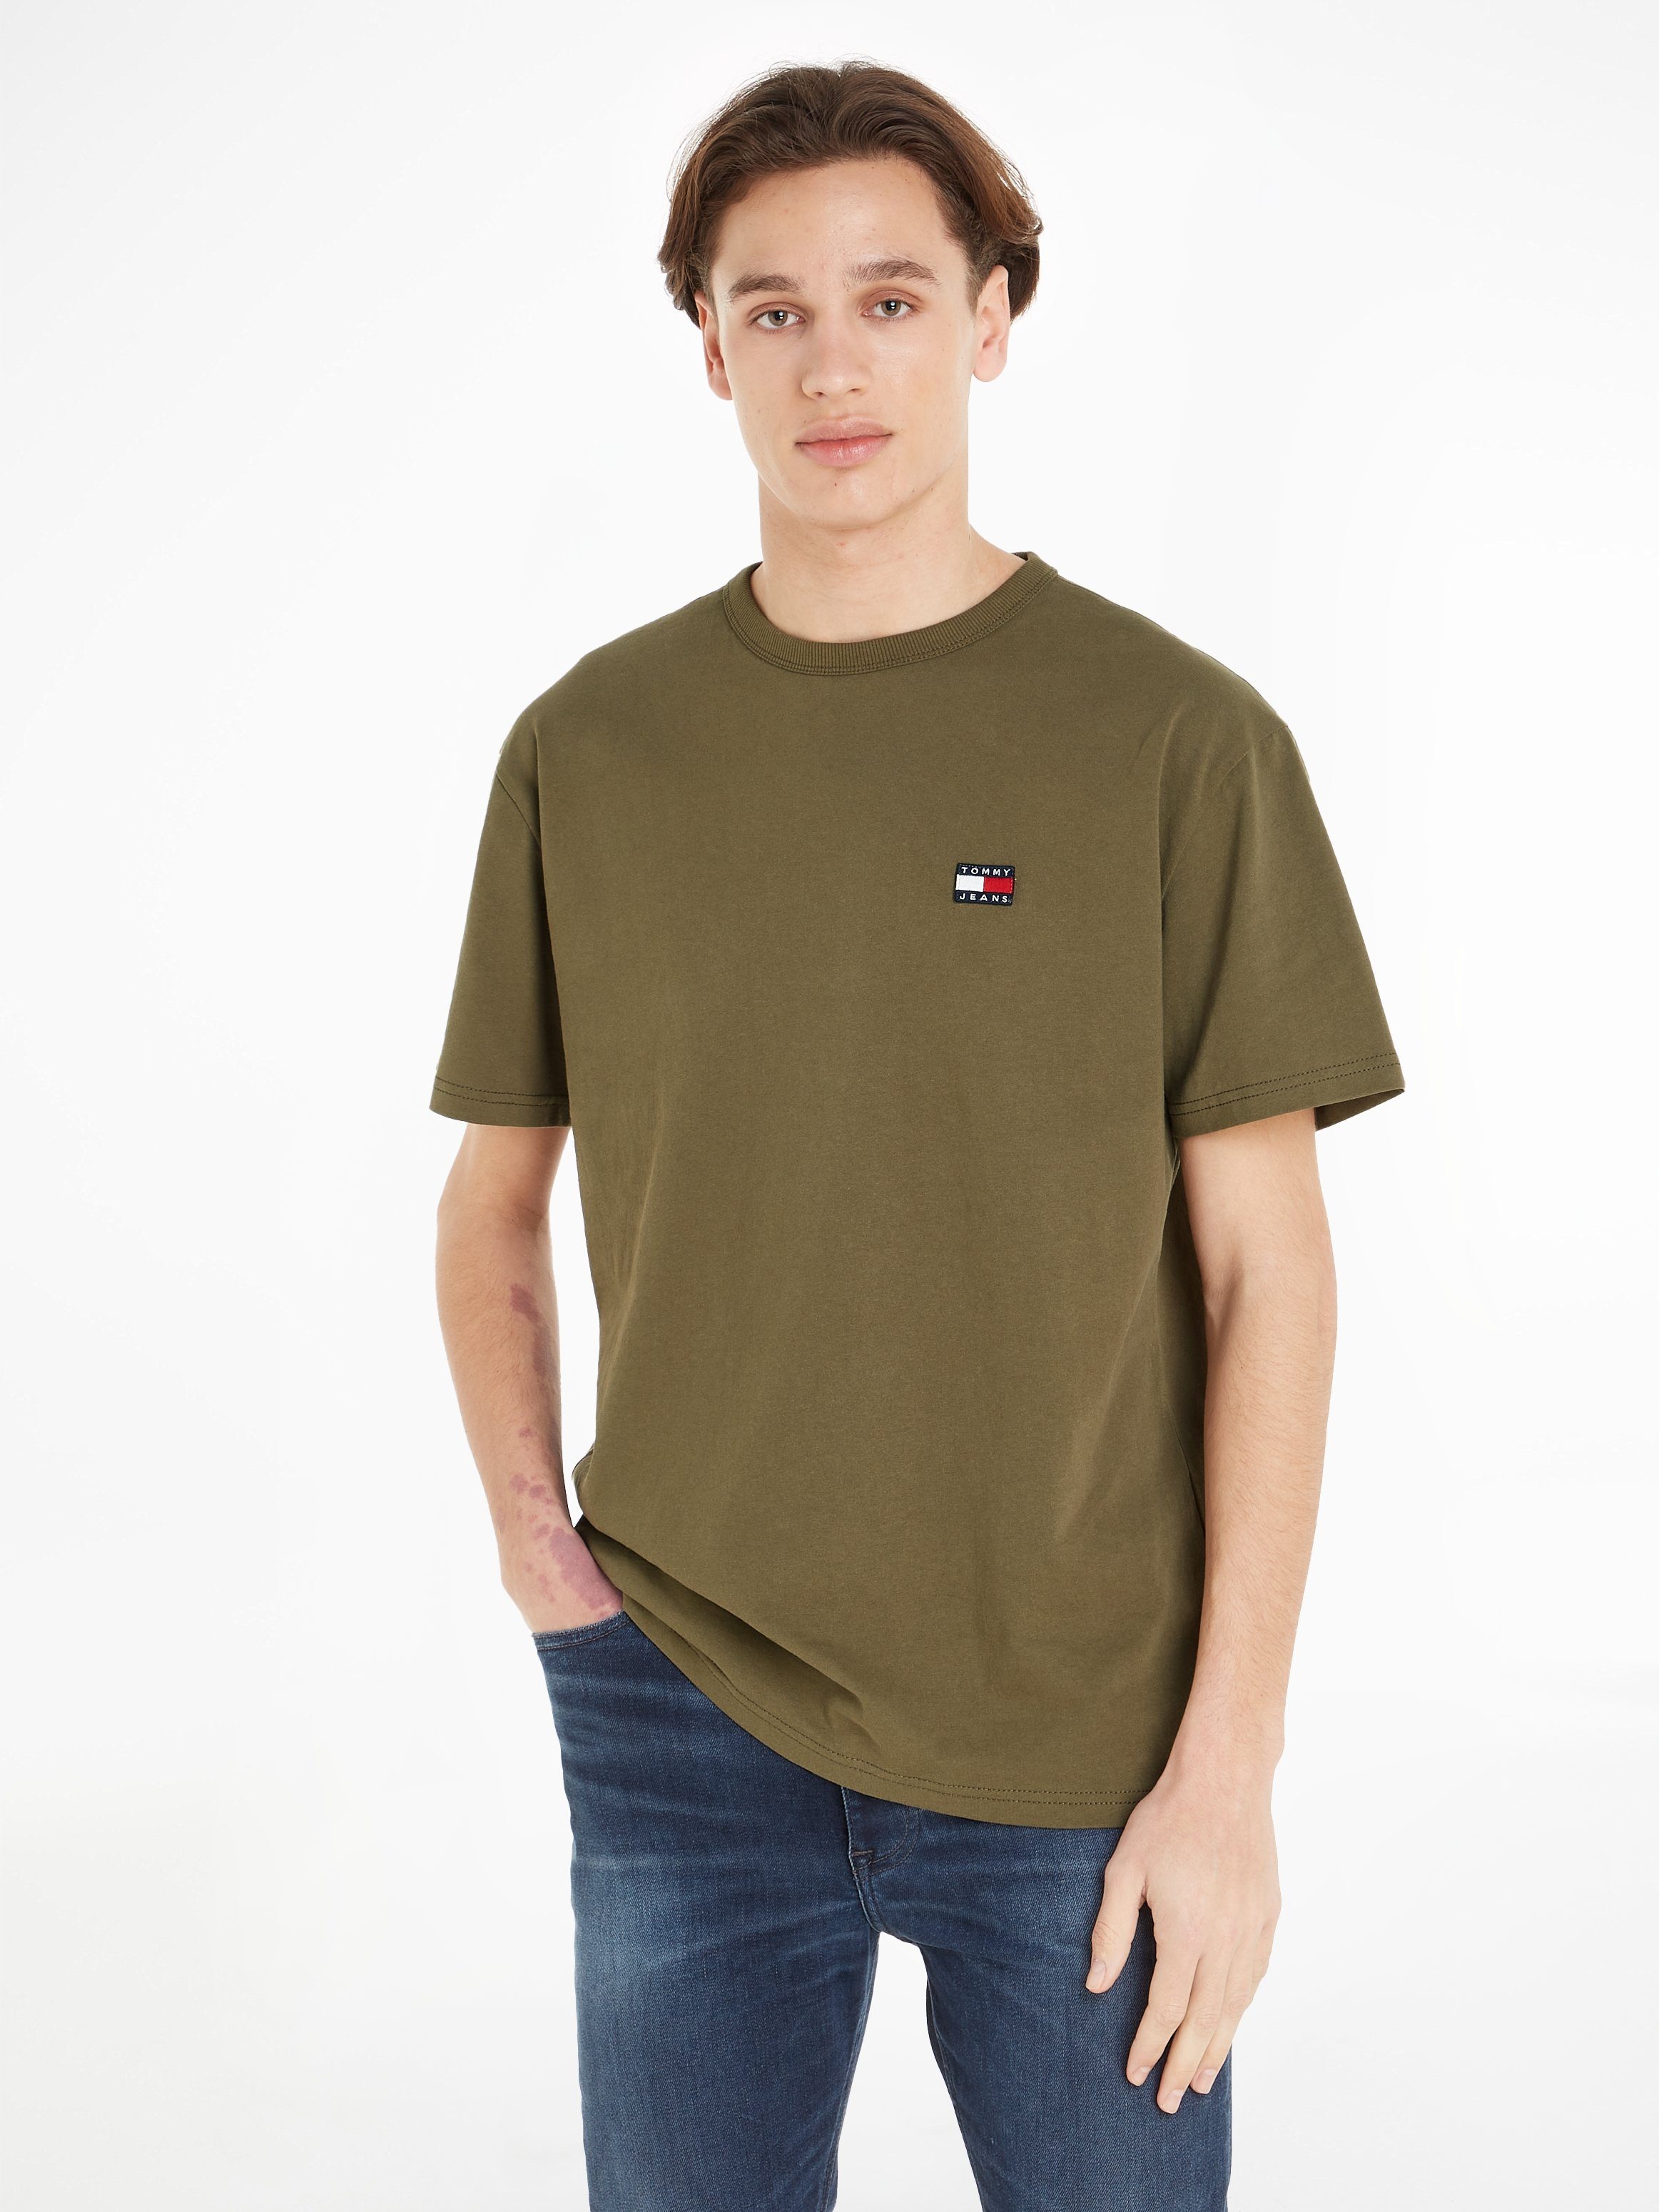 Tommy Jeans T-Shirt TJM CLSC TOMMY Olive BADGE XS TEE Green Drab